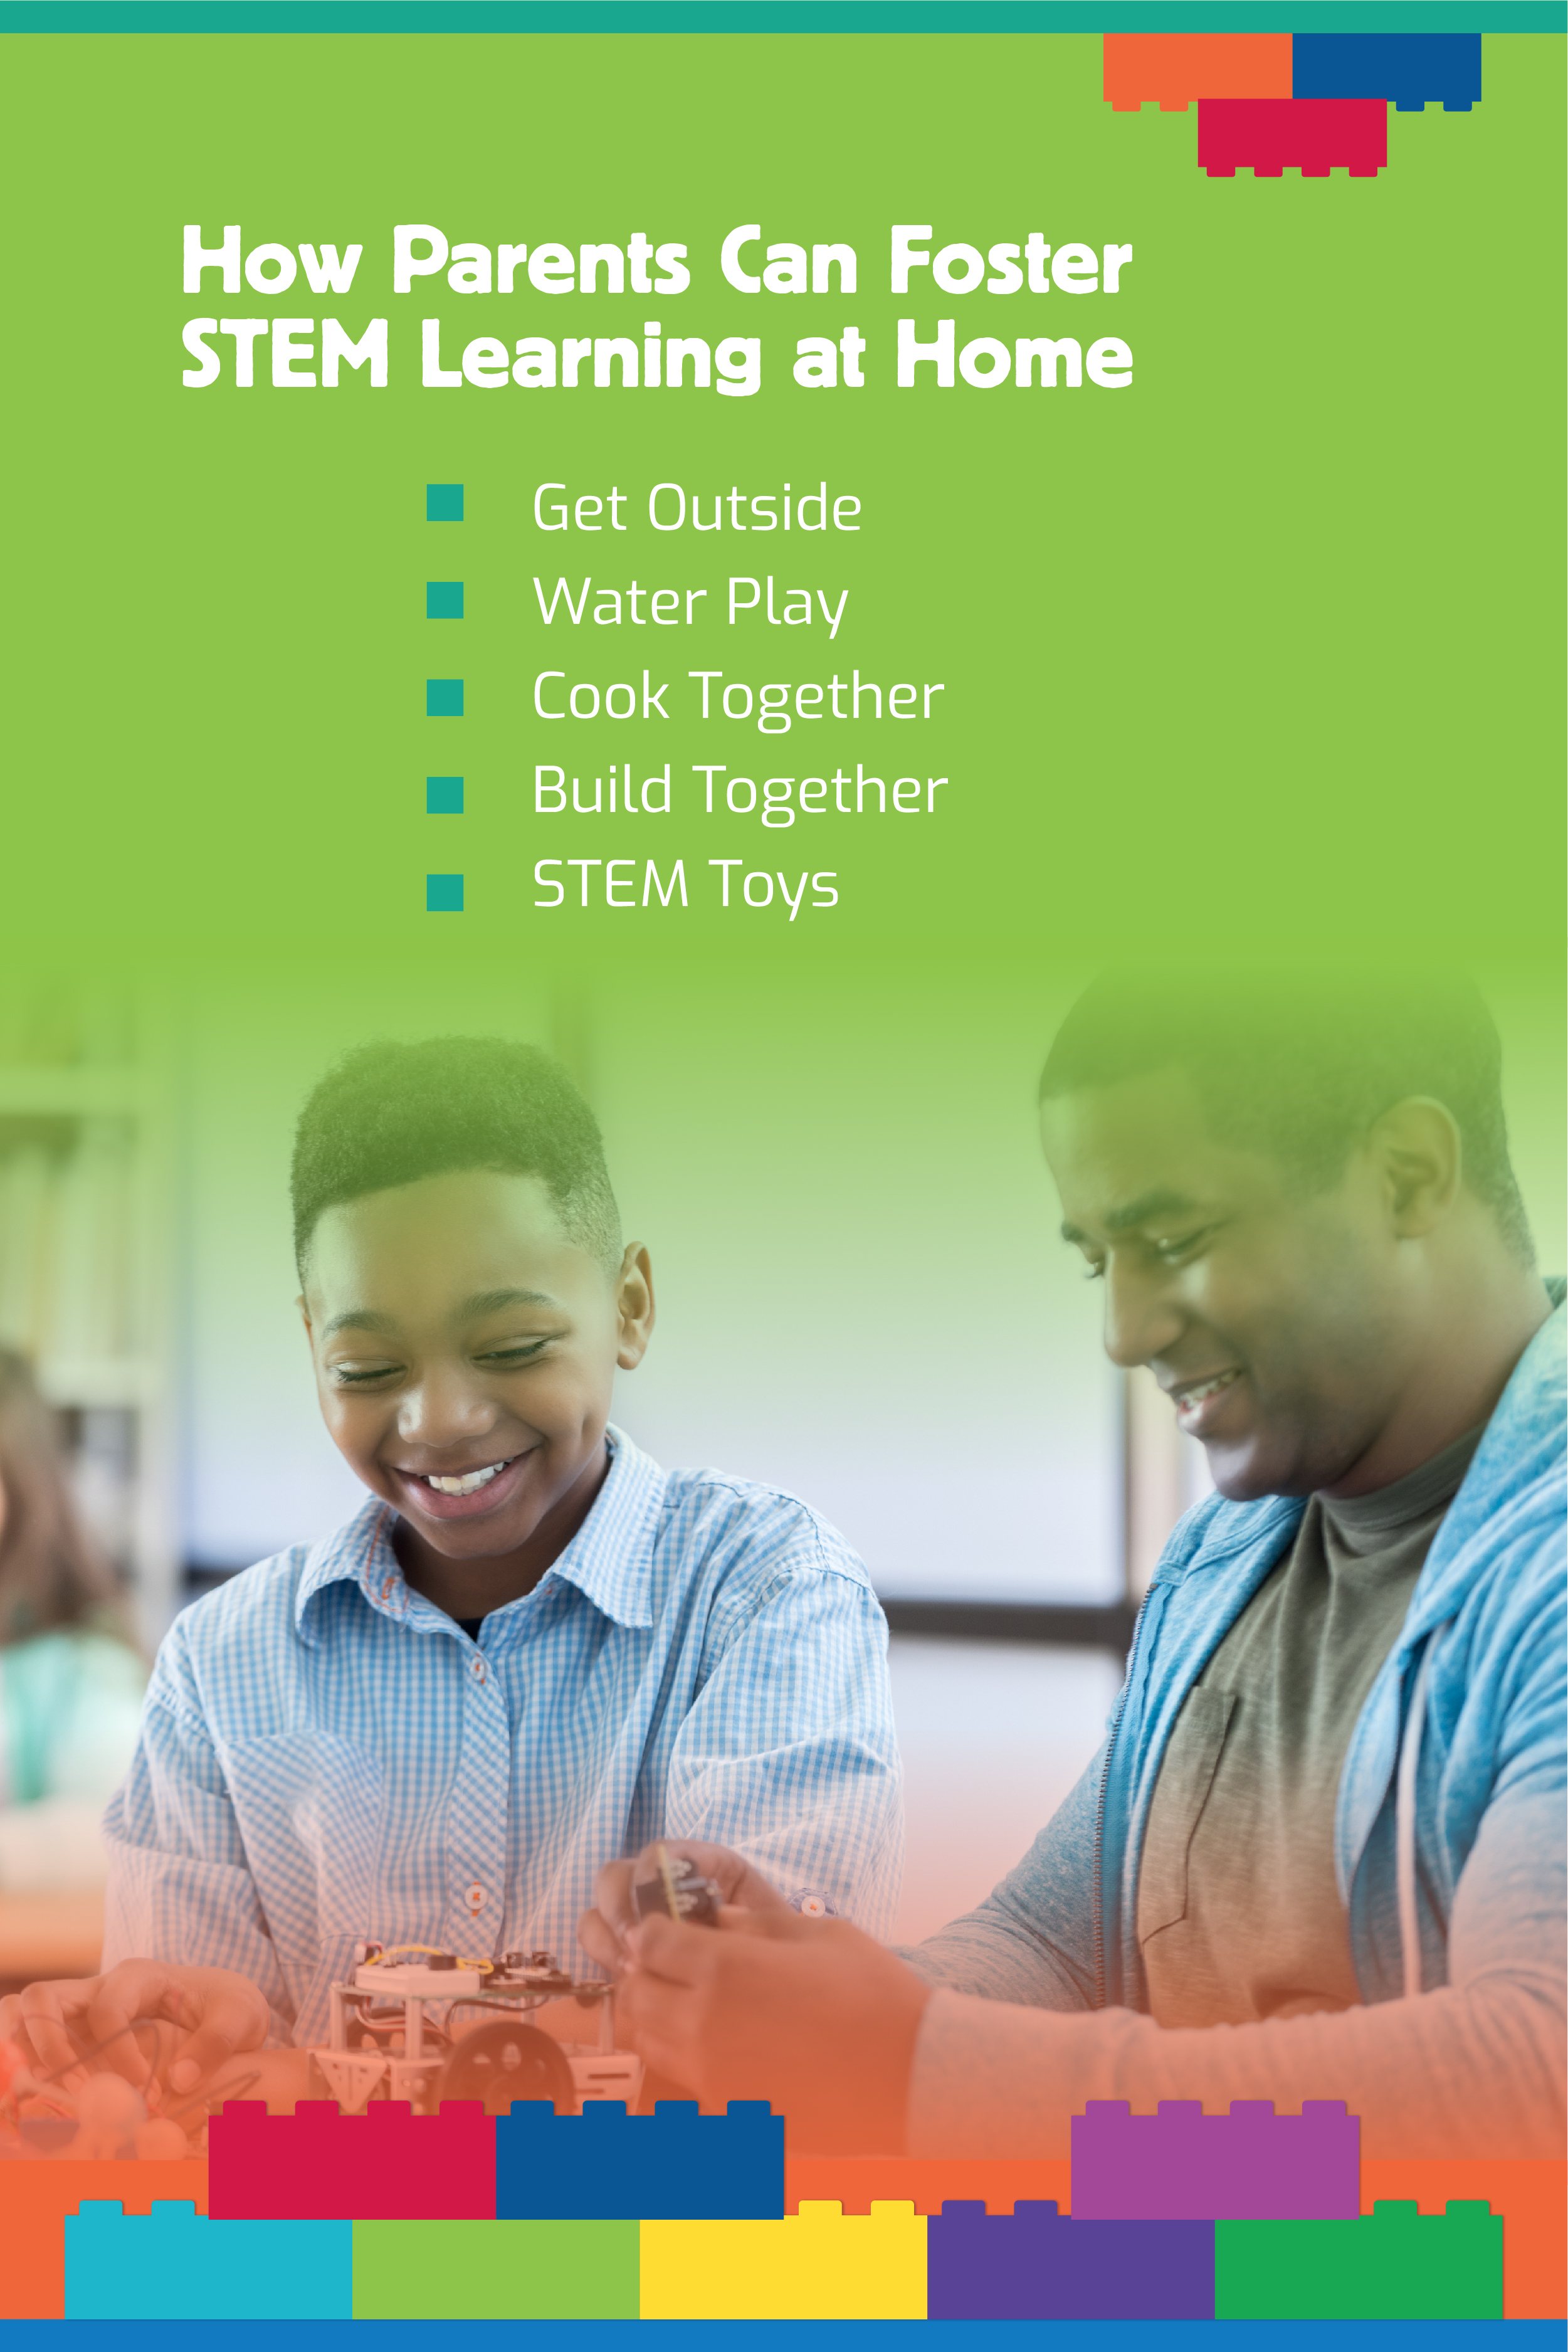 How Parents Can Foster STEM Learning at Home